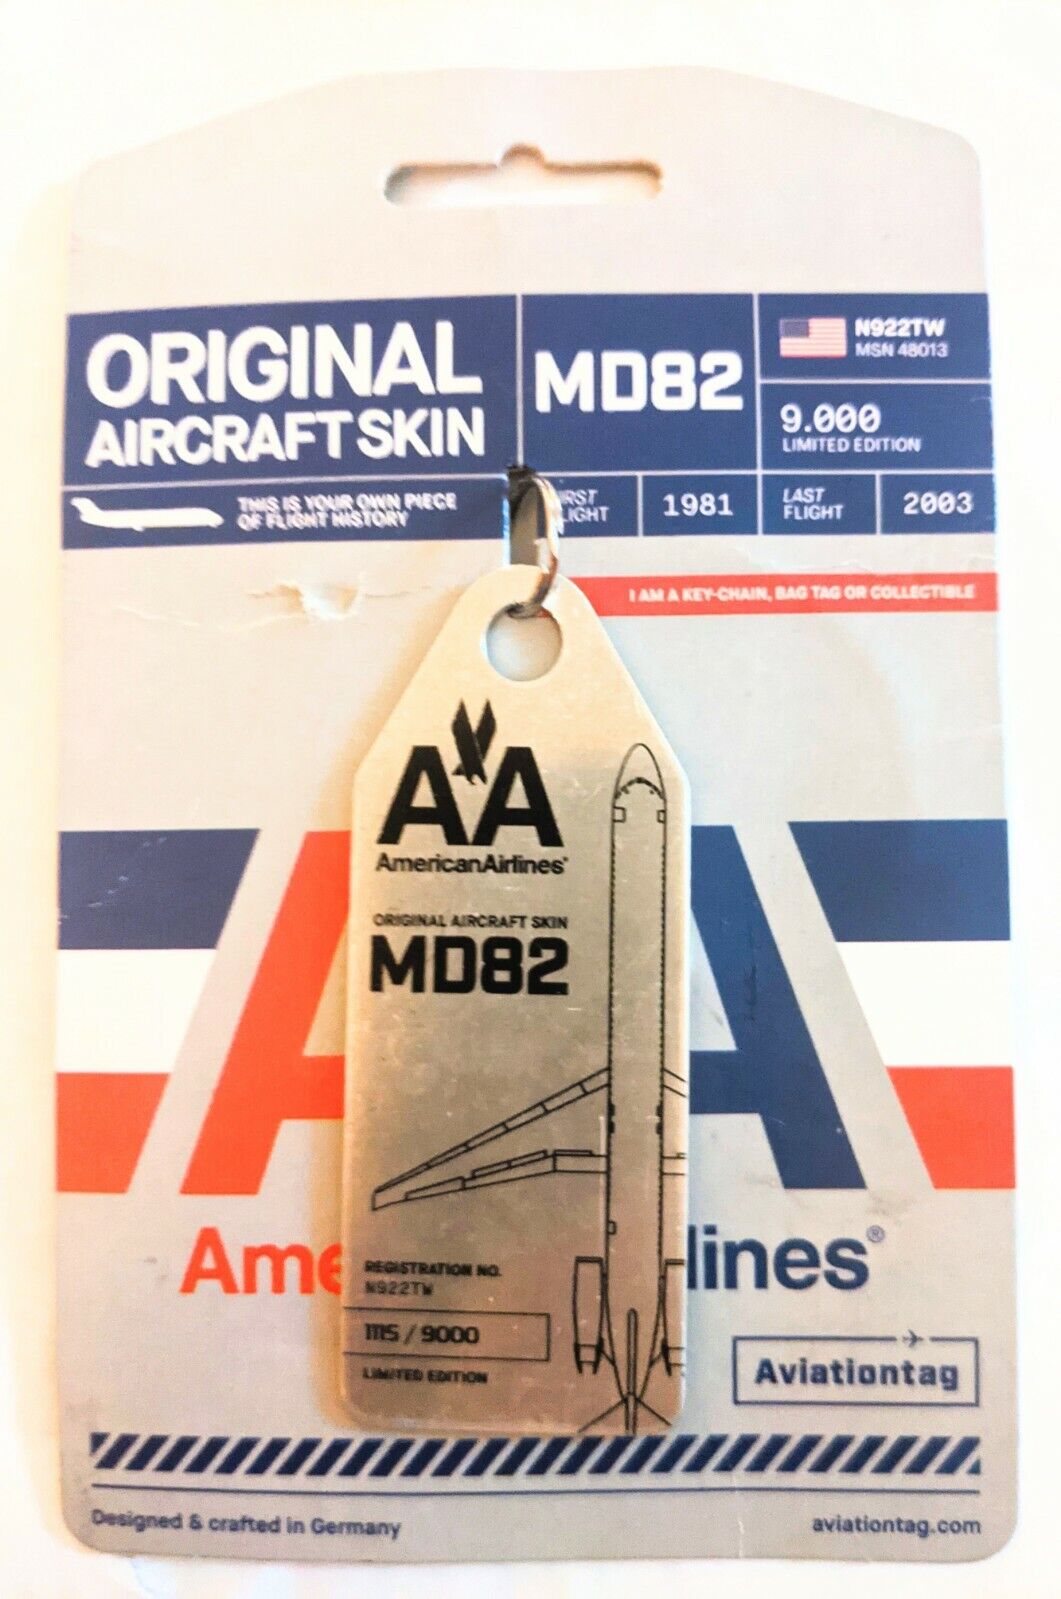 American Airlines MD-80 MD-82 Authentic Aircraft Skin Key Chain Luggage ID Tag